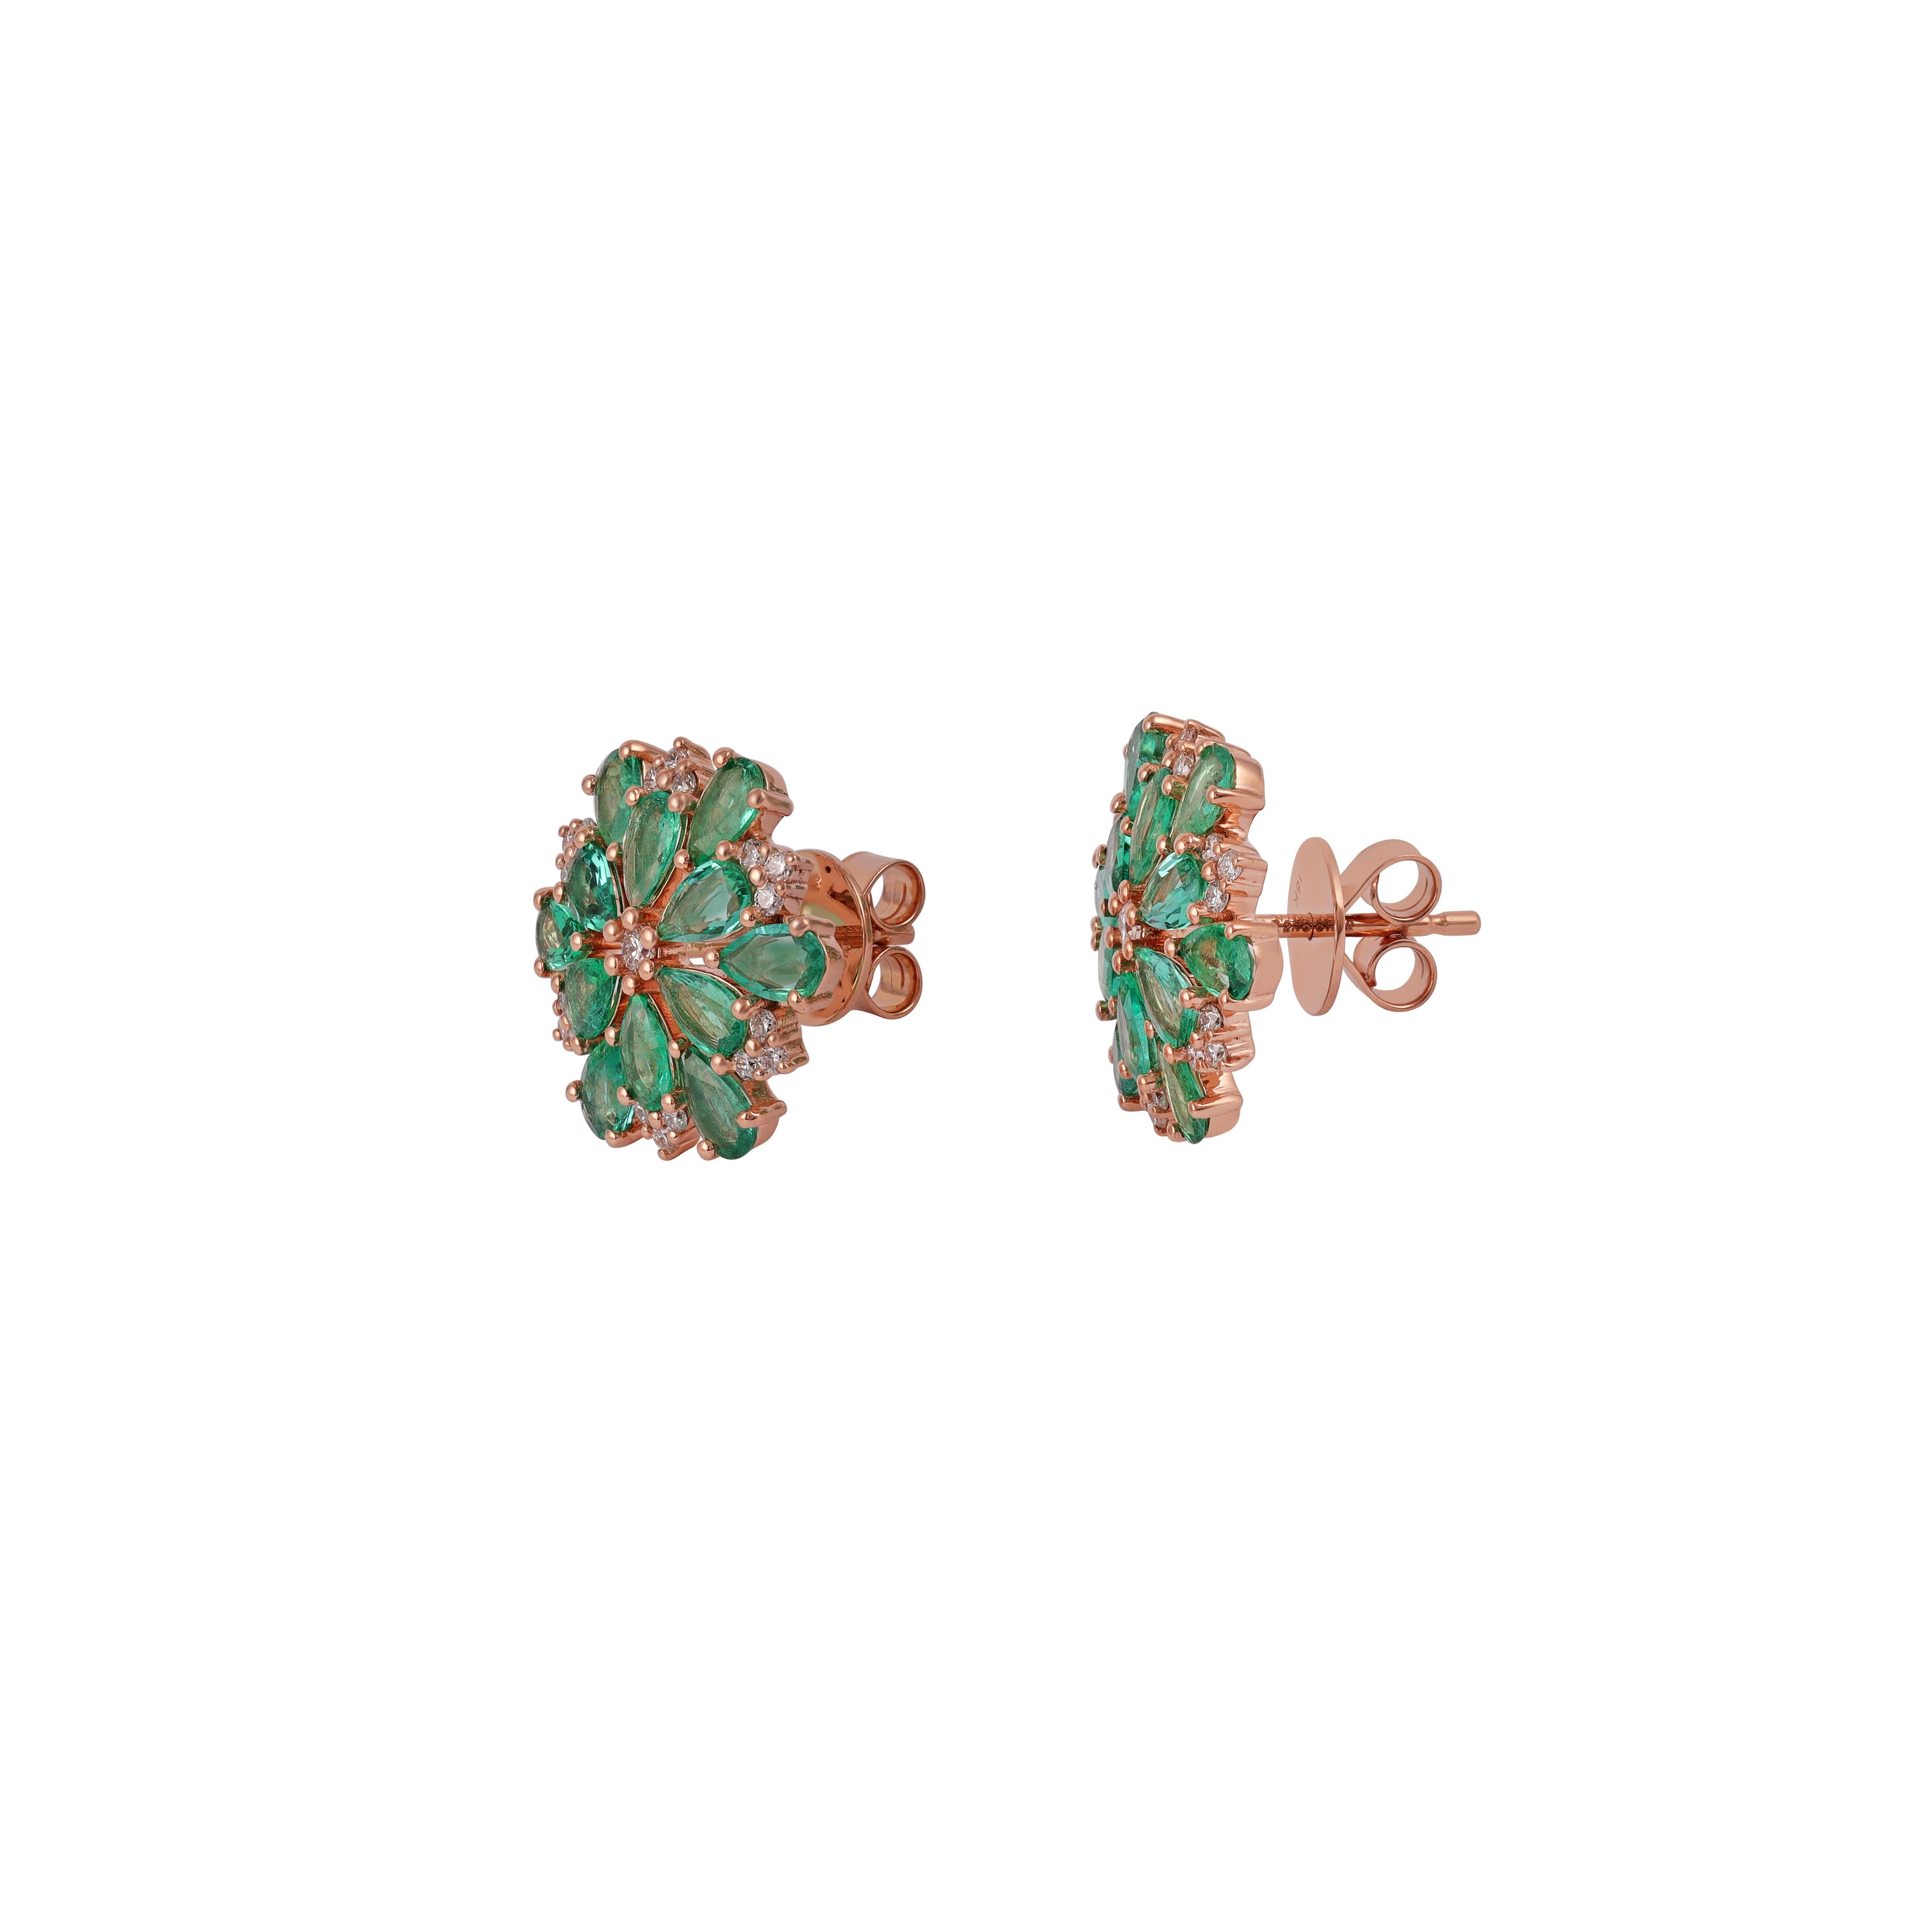 Contemporary 2.76 Carat  Zambian Emerald and Diamond Earrings Stud in 18 Karat Rose Gold For Sale